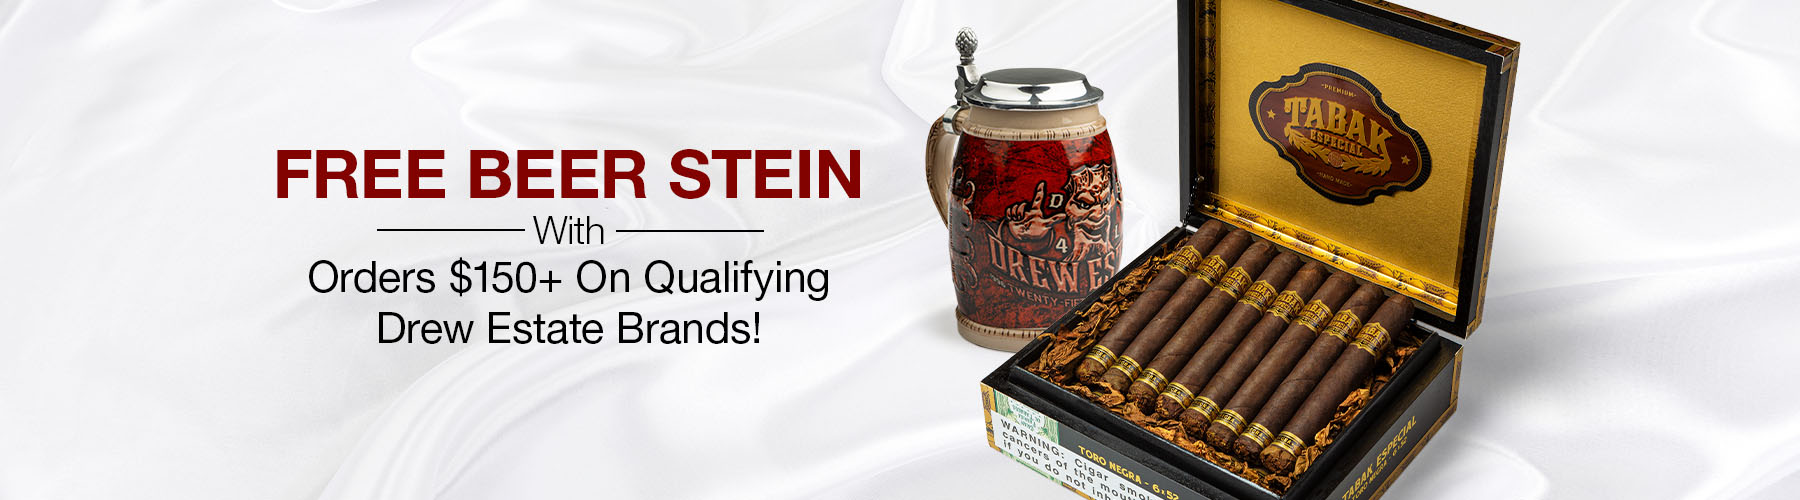 Free beer stein with orders $150+ on qualifying Drew Estate brands!